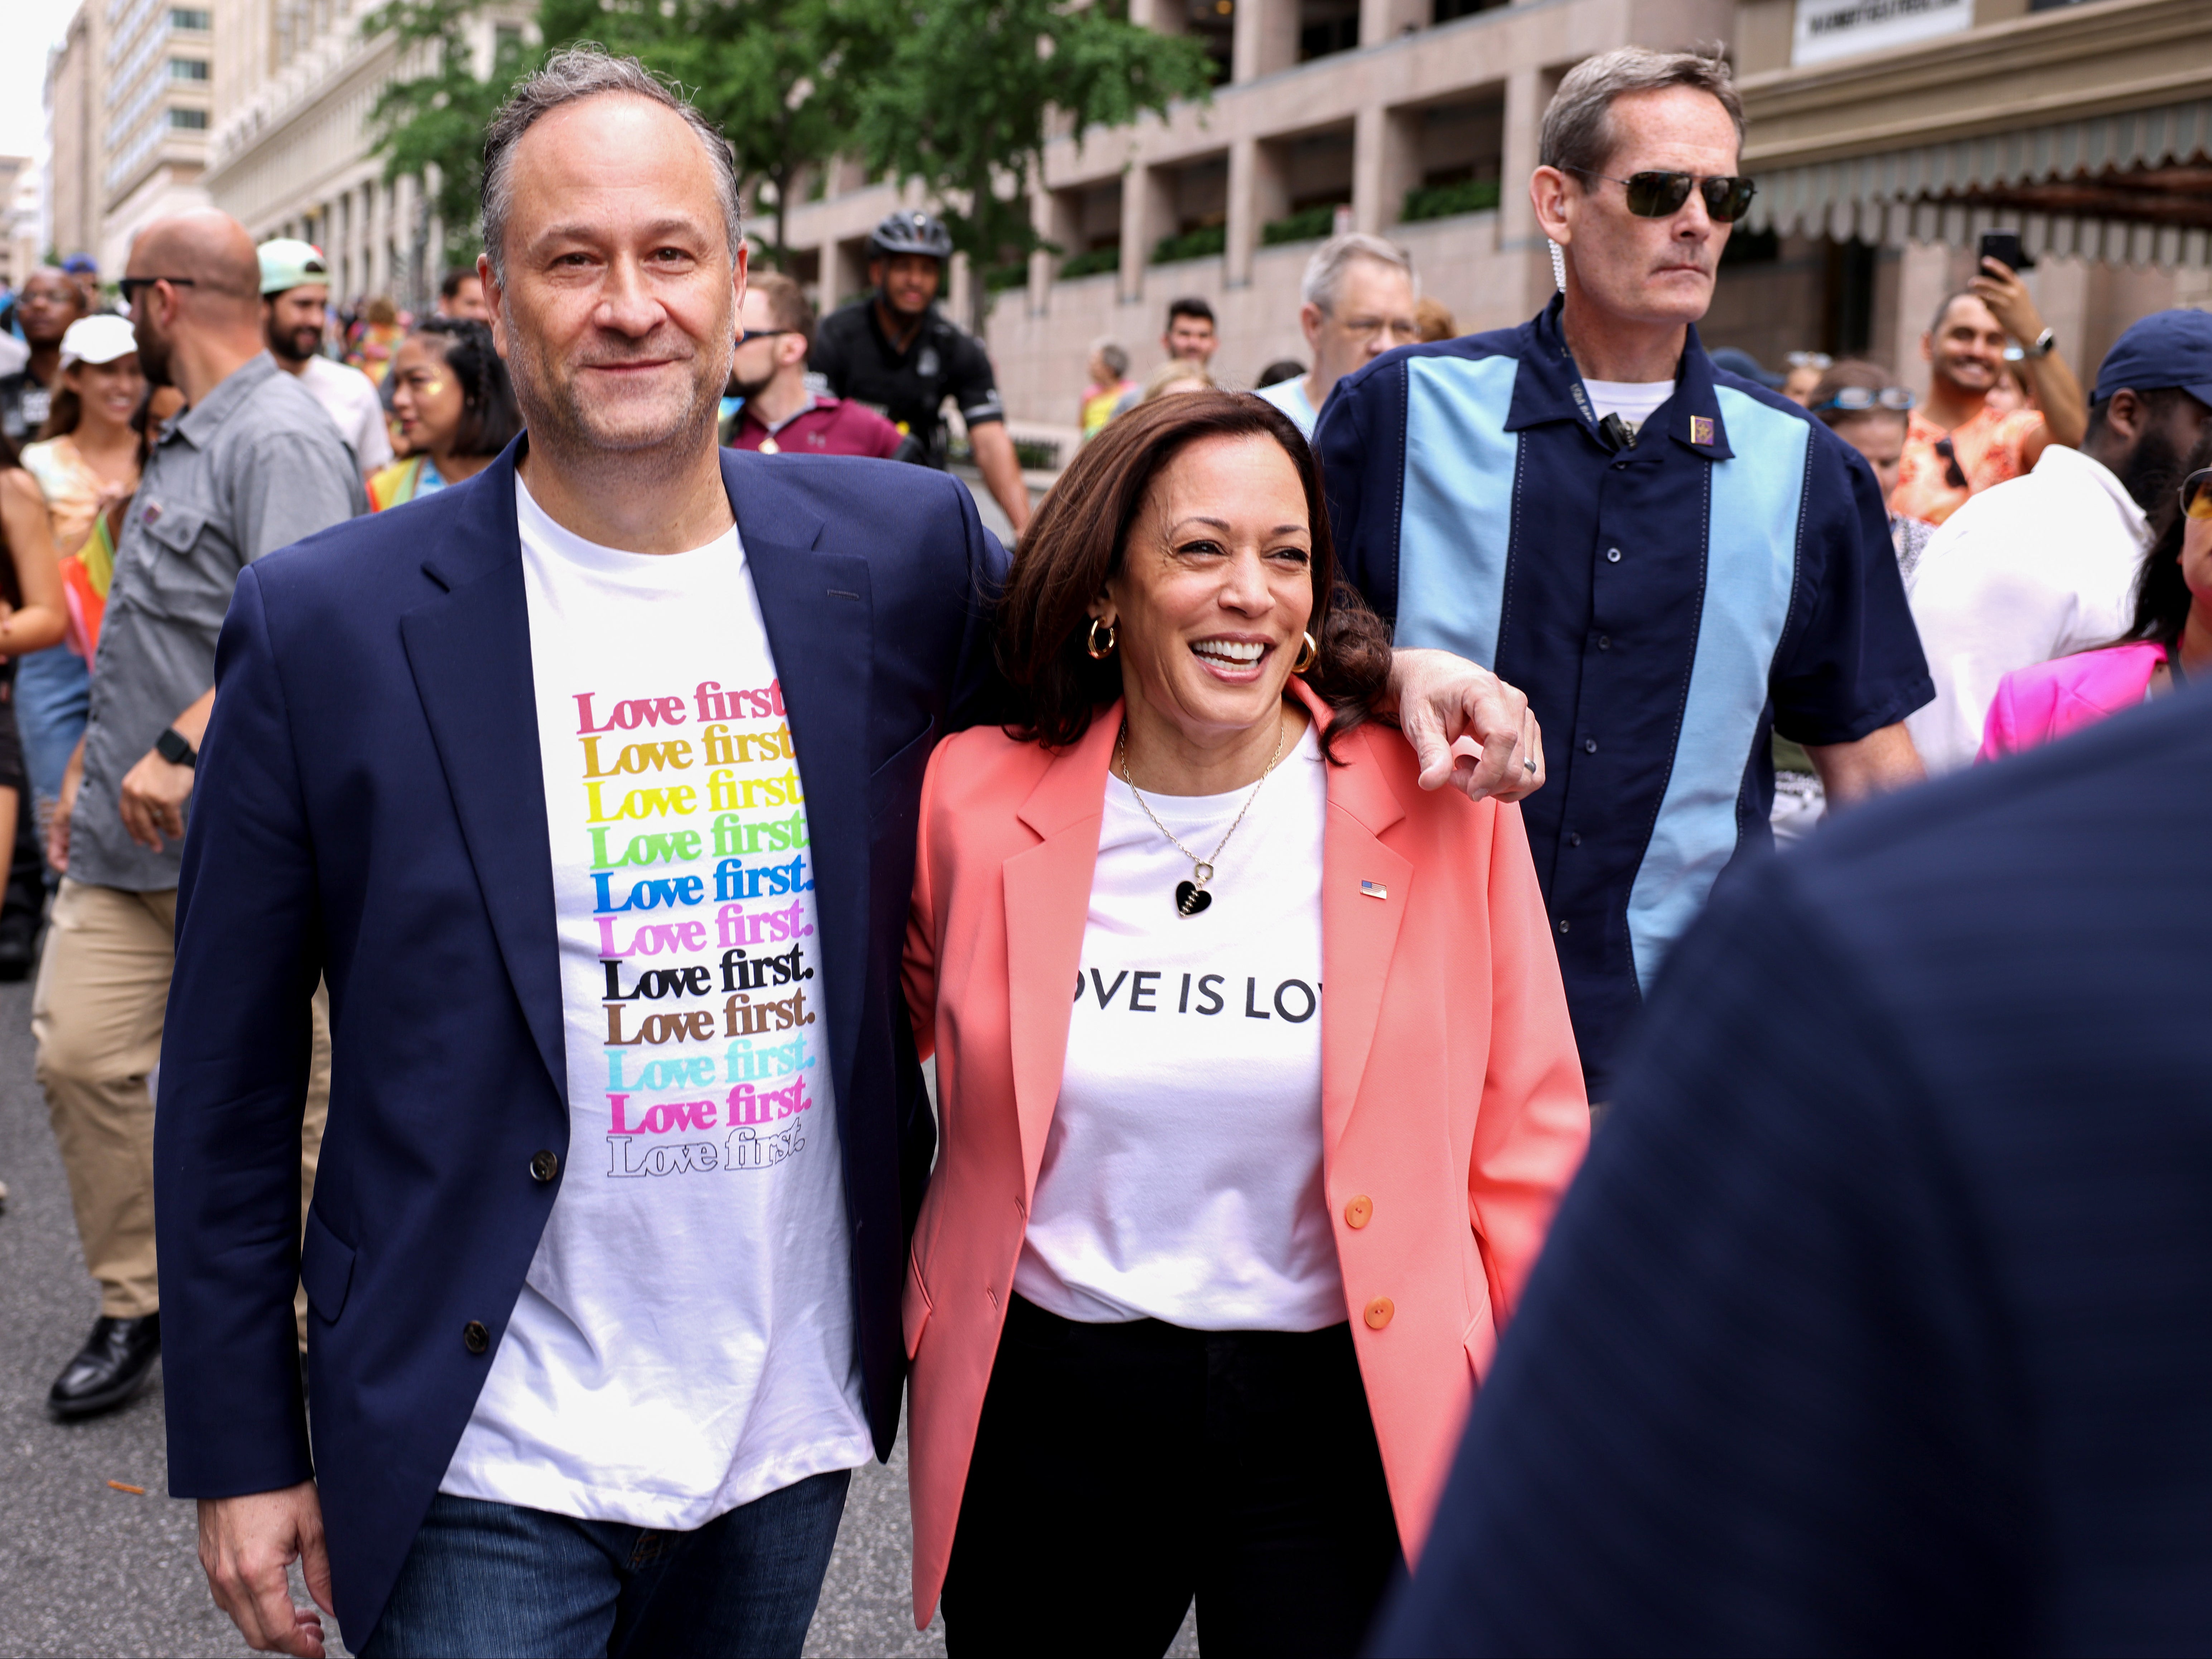 Kamala Harris Becomes First Vice President To March In Pride Event The Independent 5394